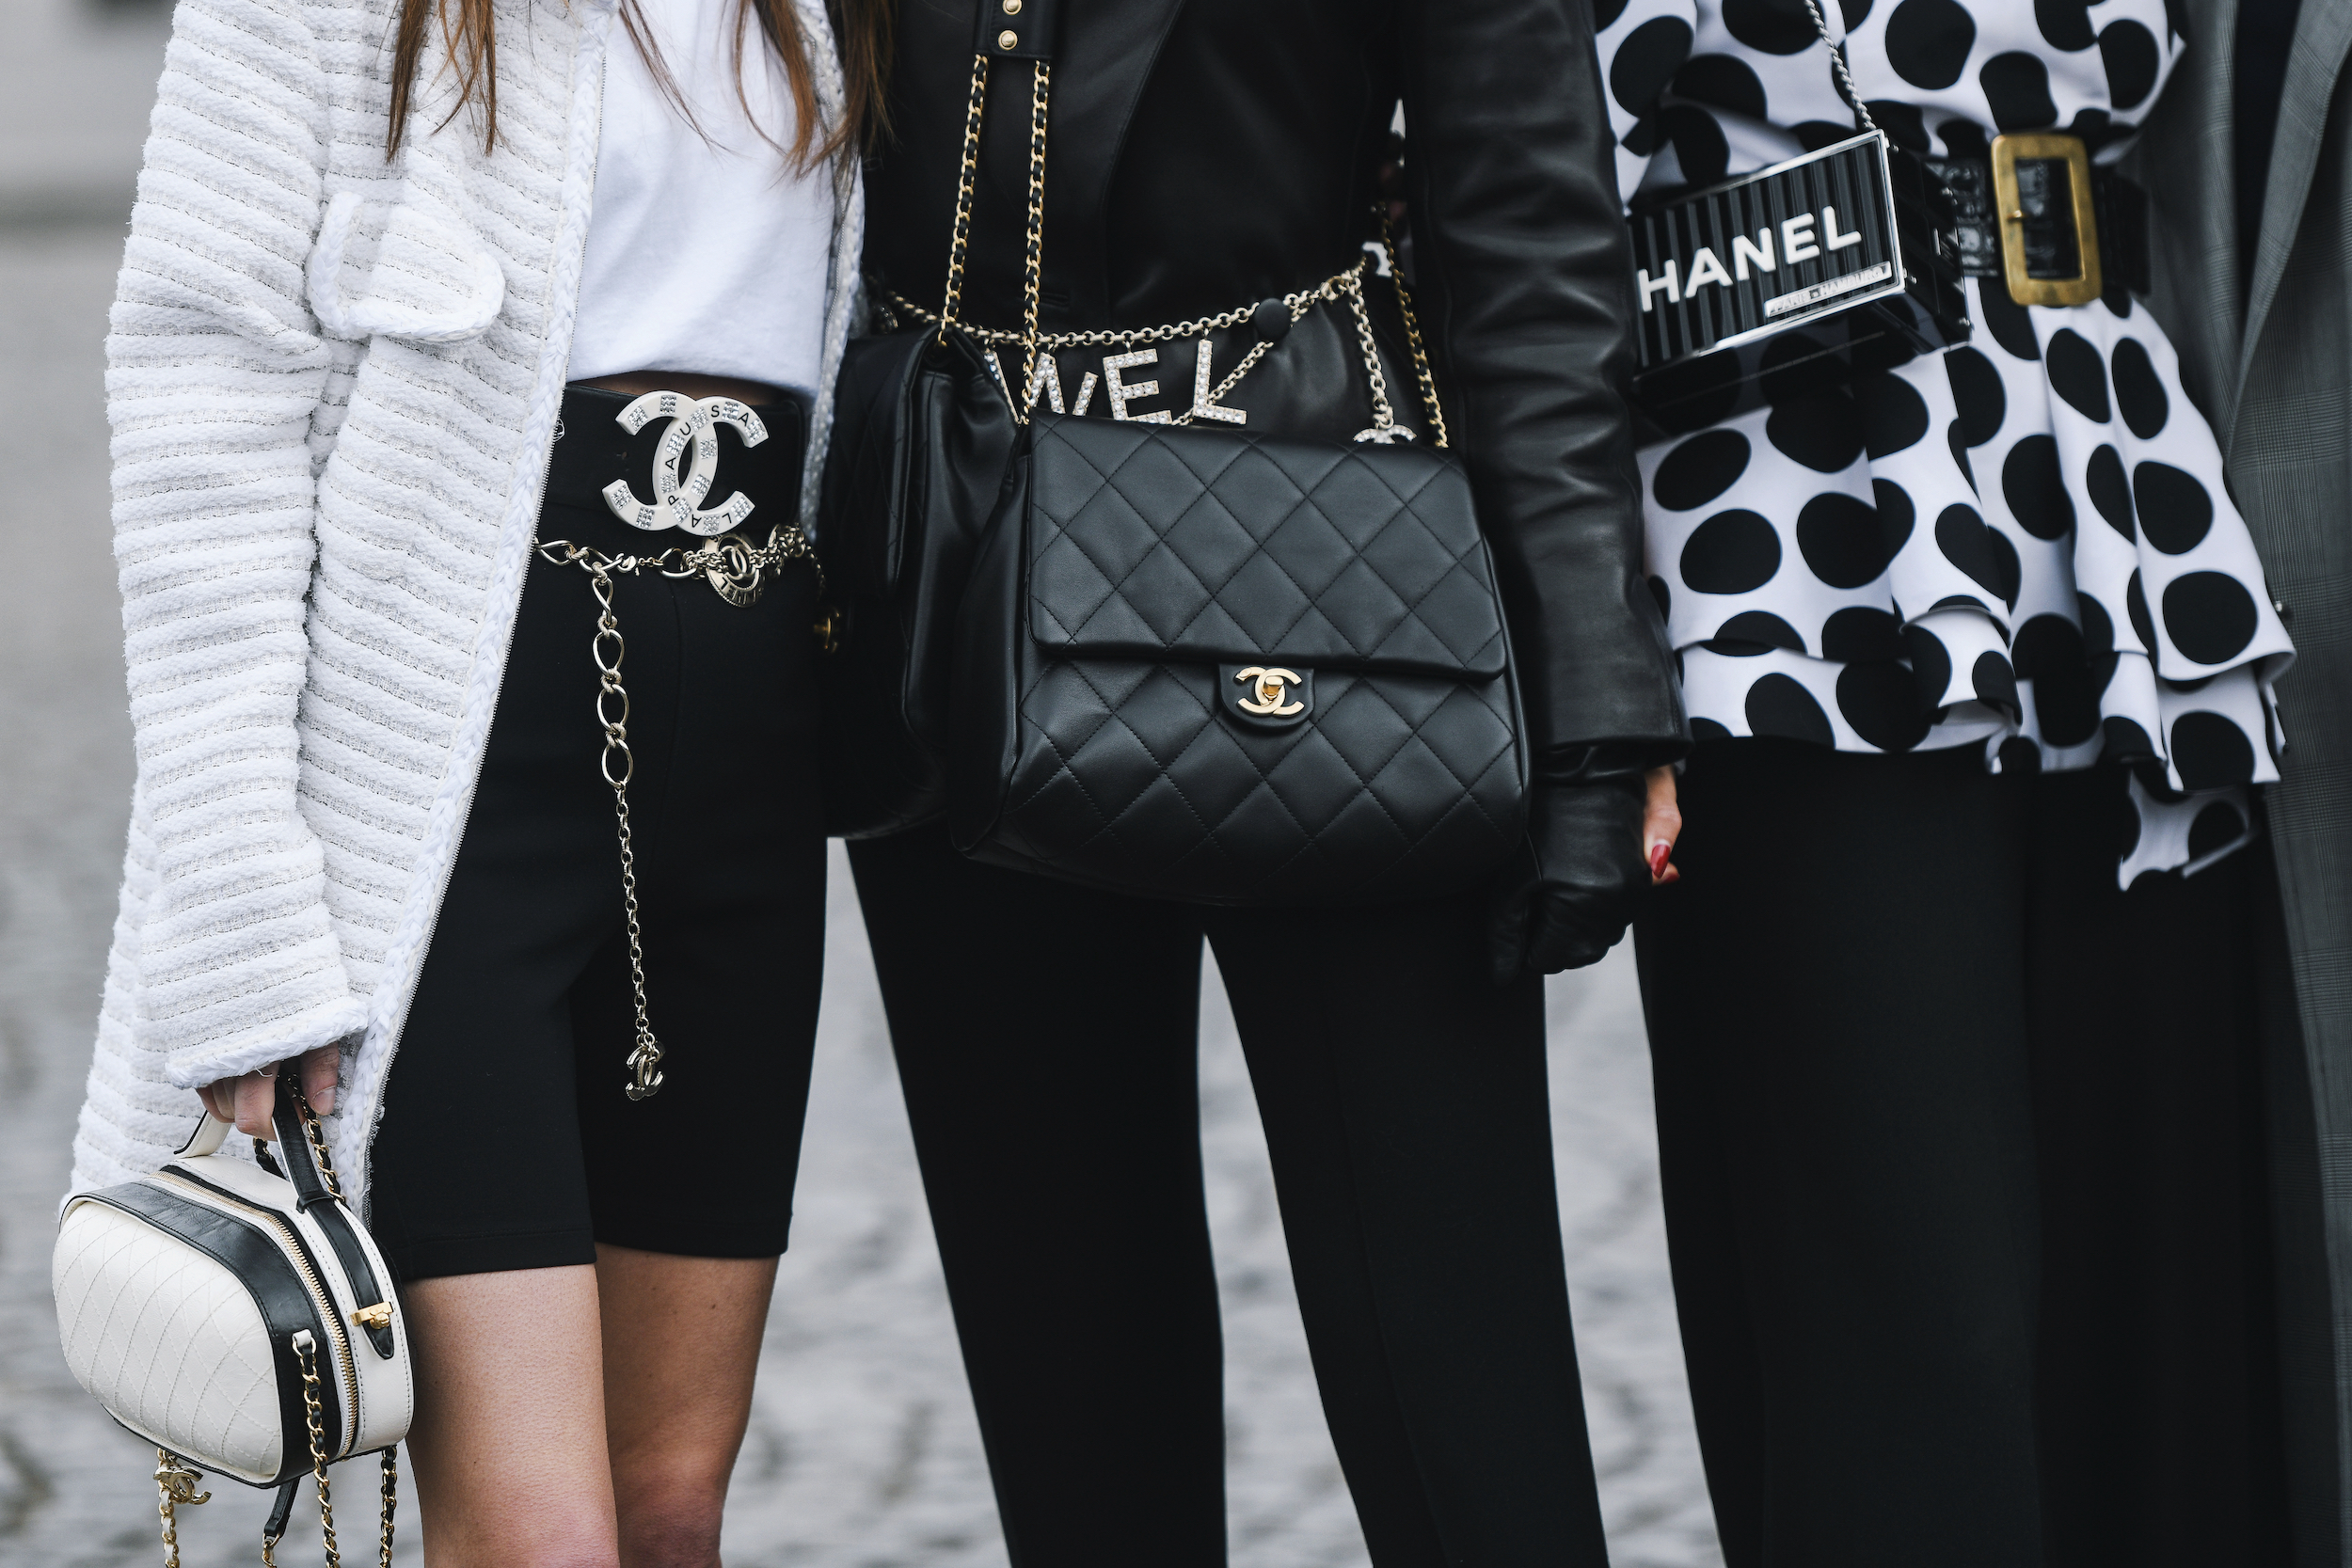 Prada vs. Chanel: Which Is More Expensive? - Luxury Viewer